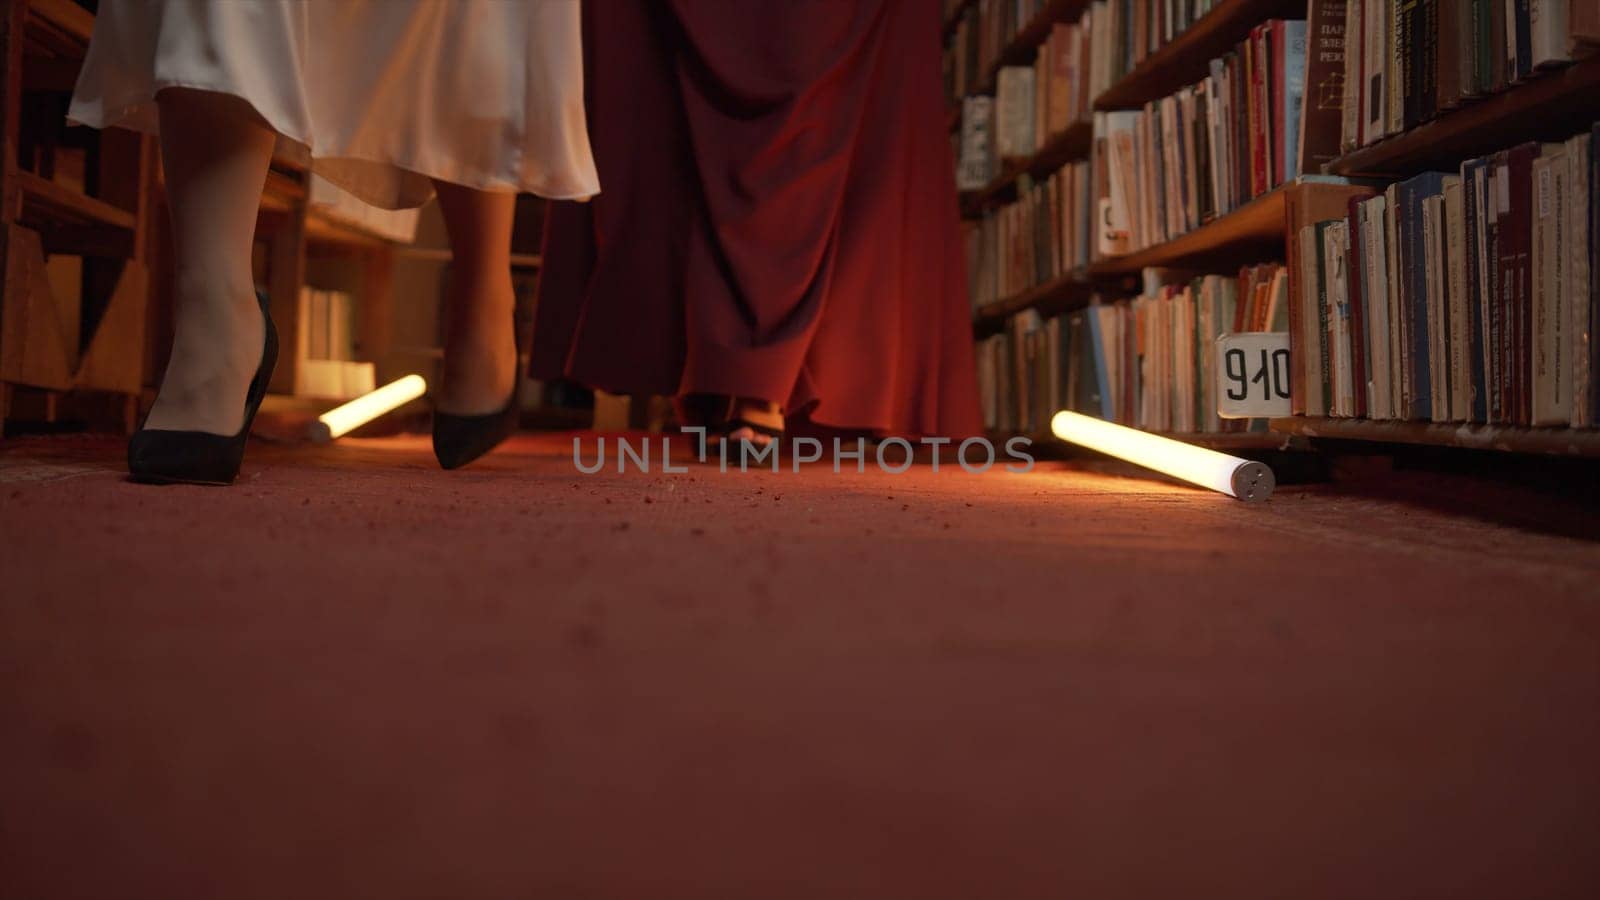 Women are mysteriously walking in library. Stock footage. Secret sorority in night library. Elegant women mysteriously gather in night library with flashing light.